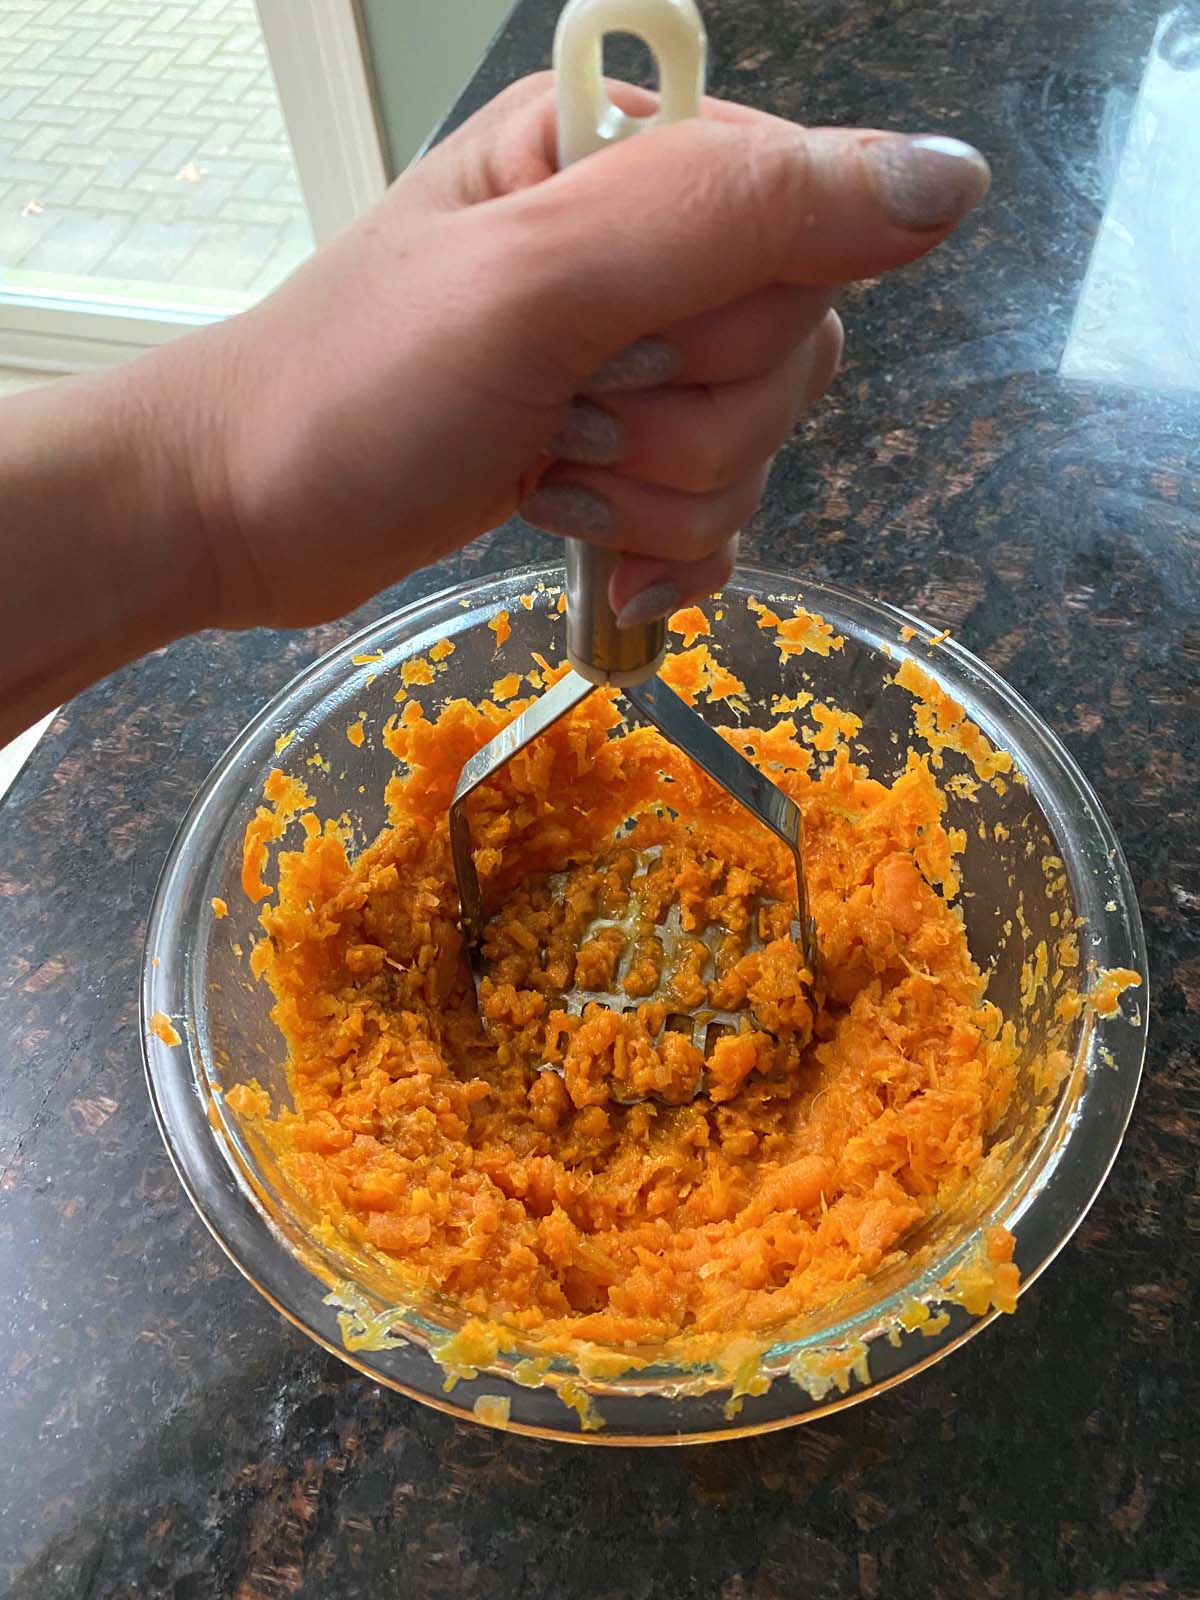 Cooked carrots being mashed with a potato masher.